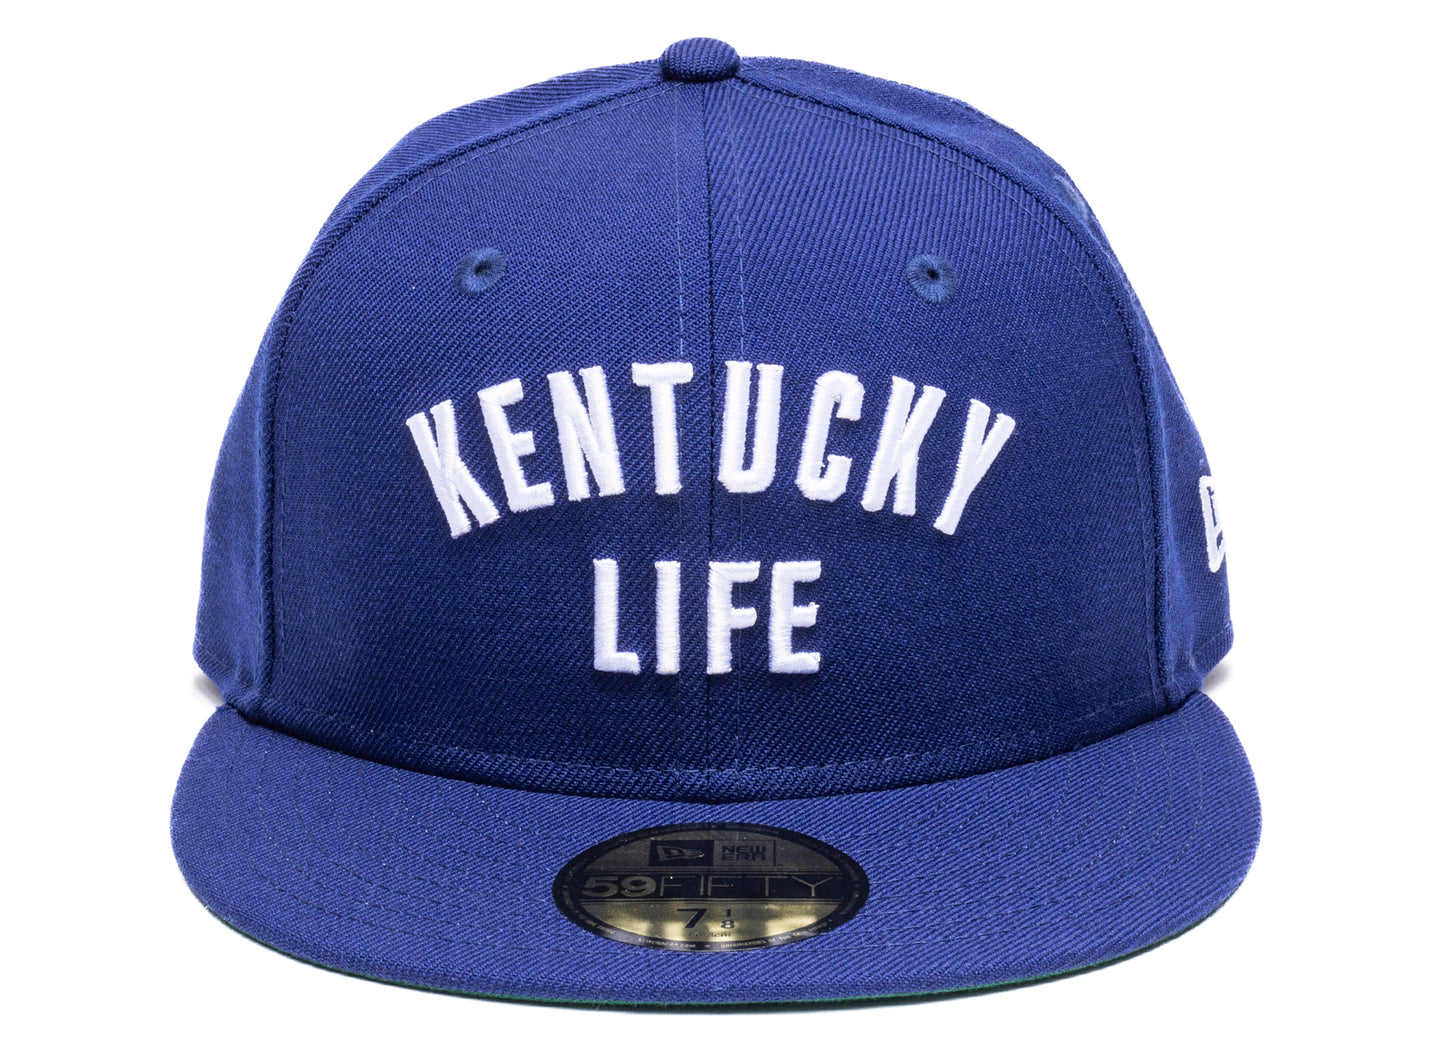 New Era x Oneness Kentucky Life Fitted Hat in Royal xld